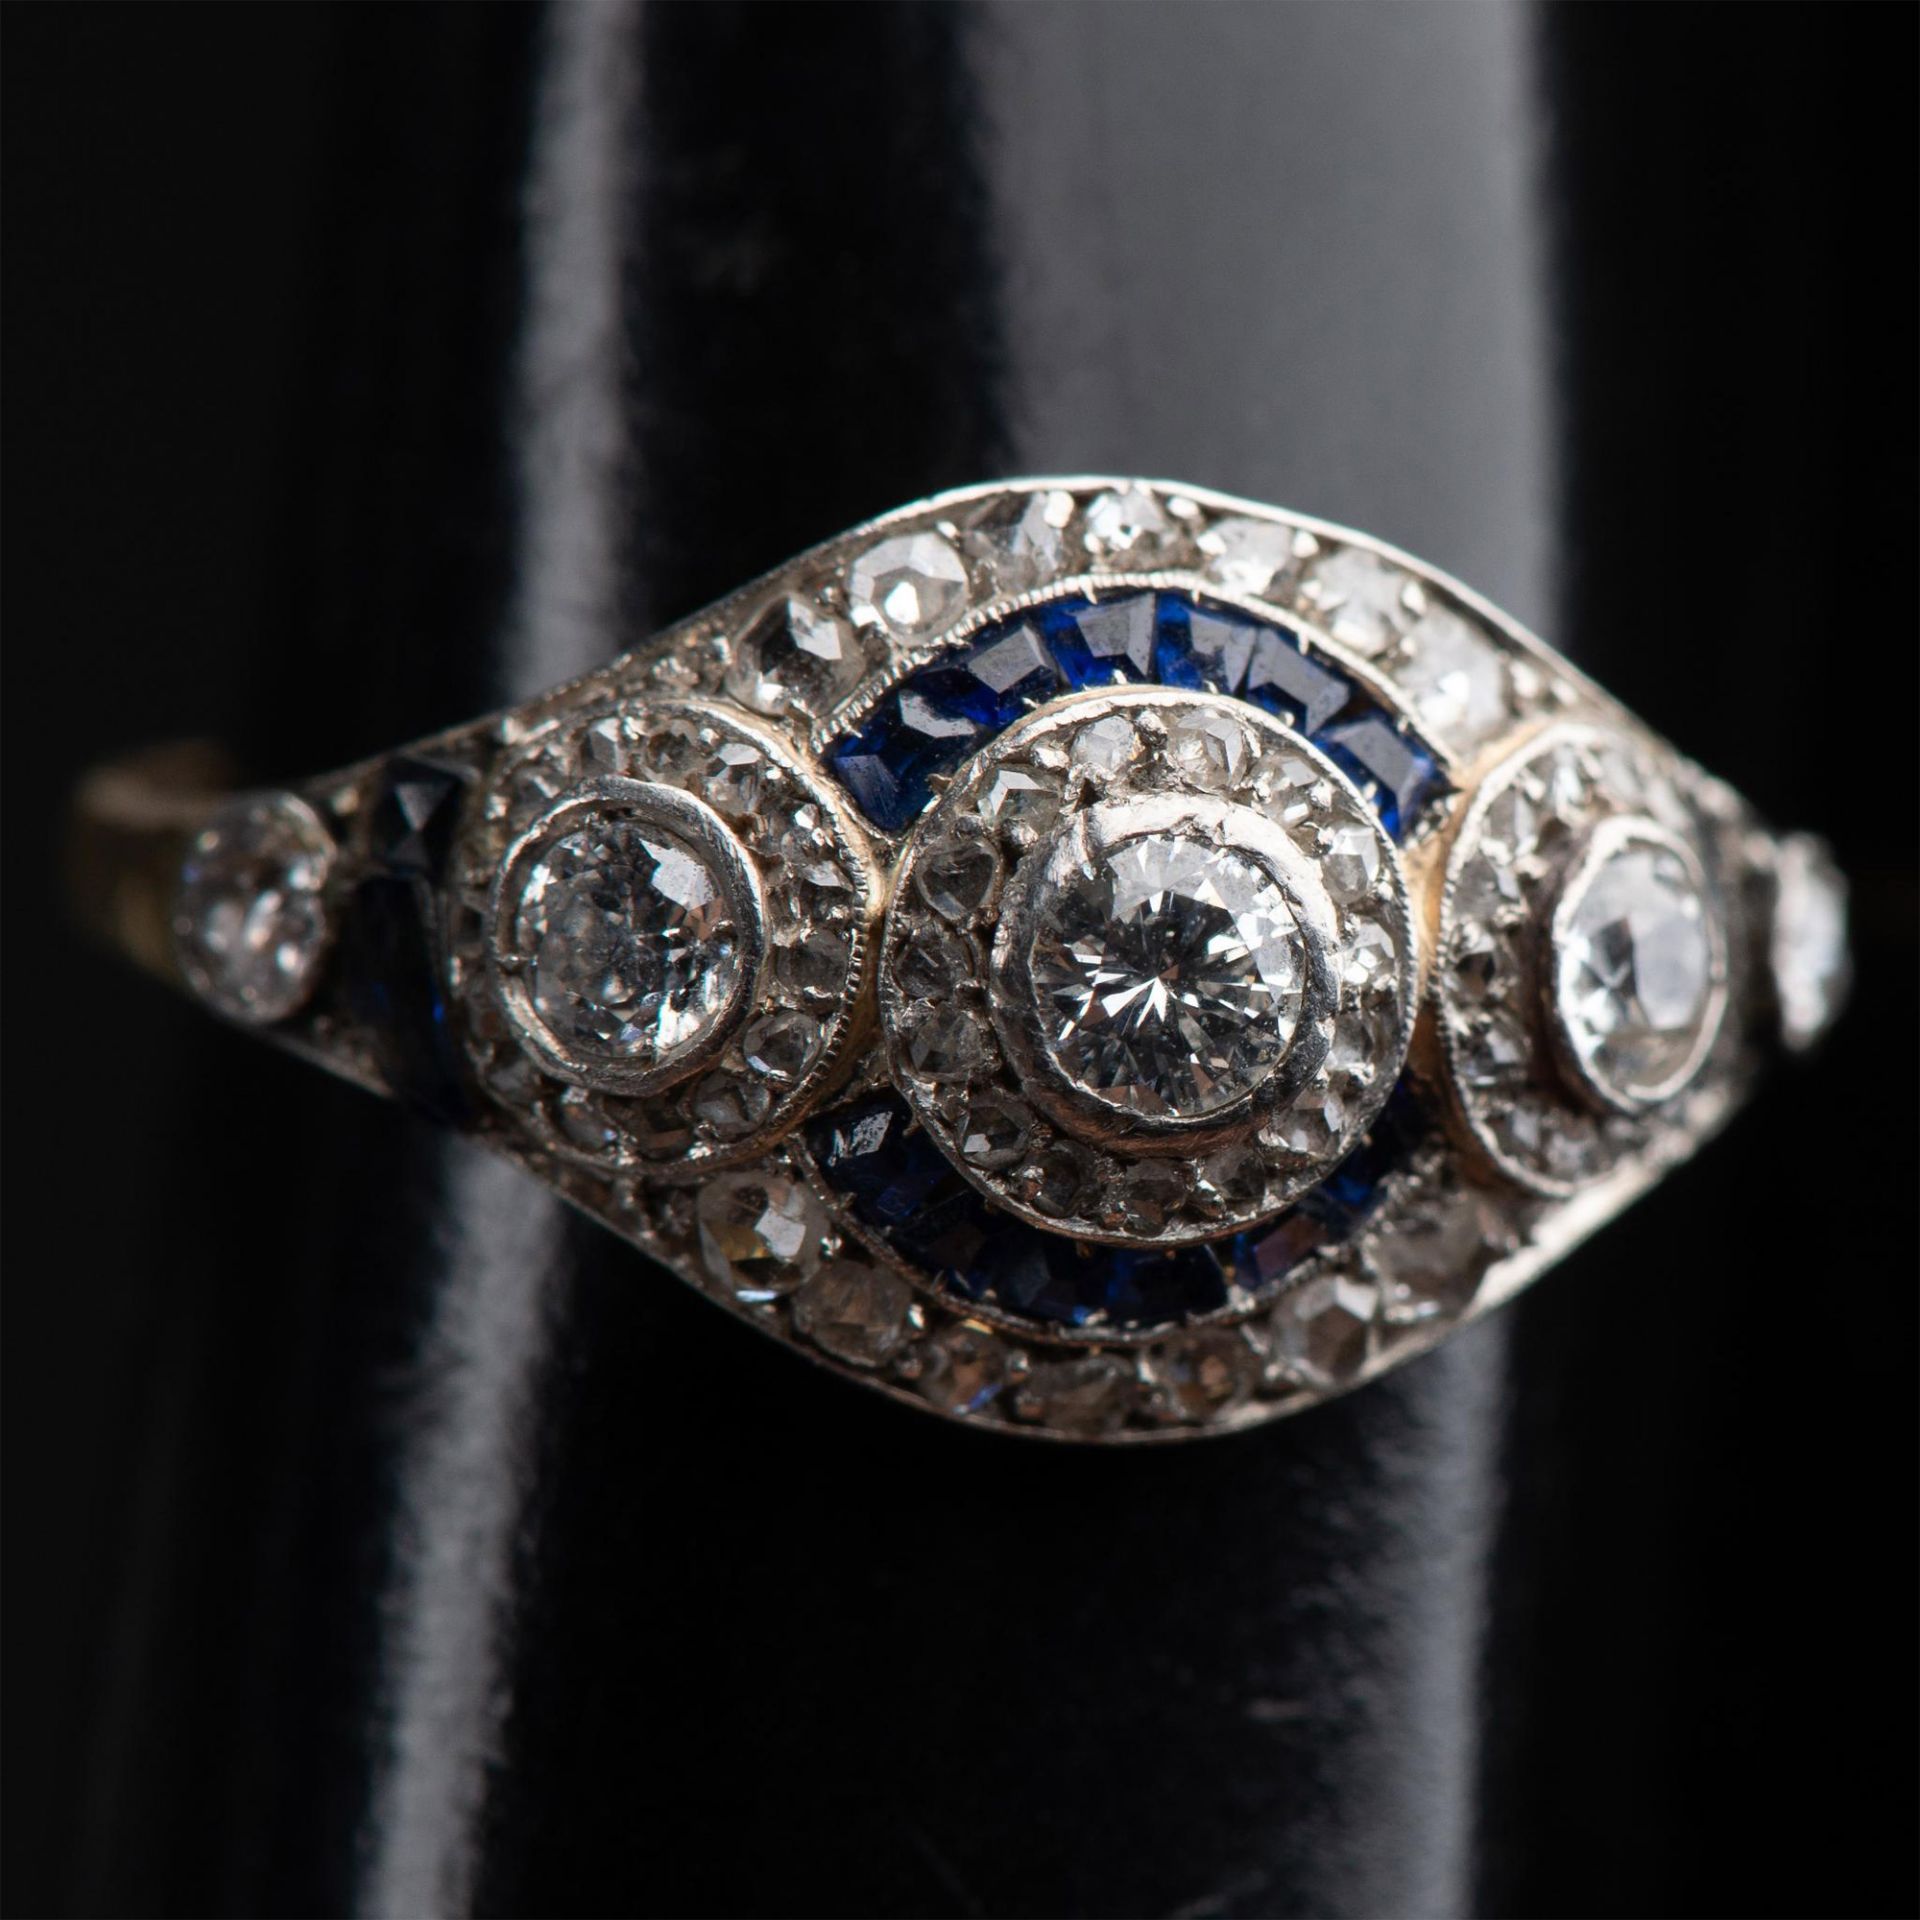 Art Deco 18K Gold, Diamonds and Sapphire Ring - Image 6 of 8